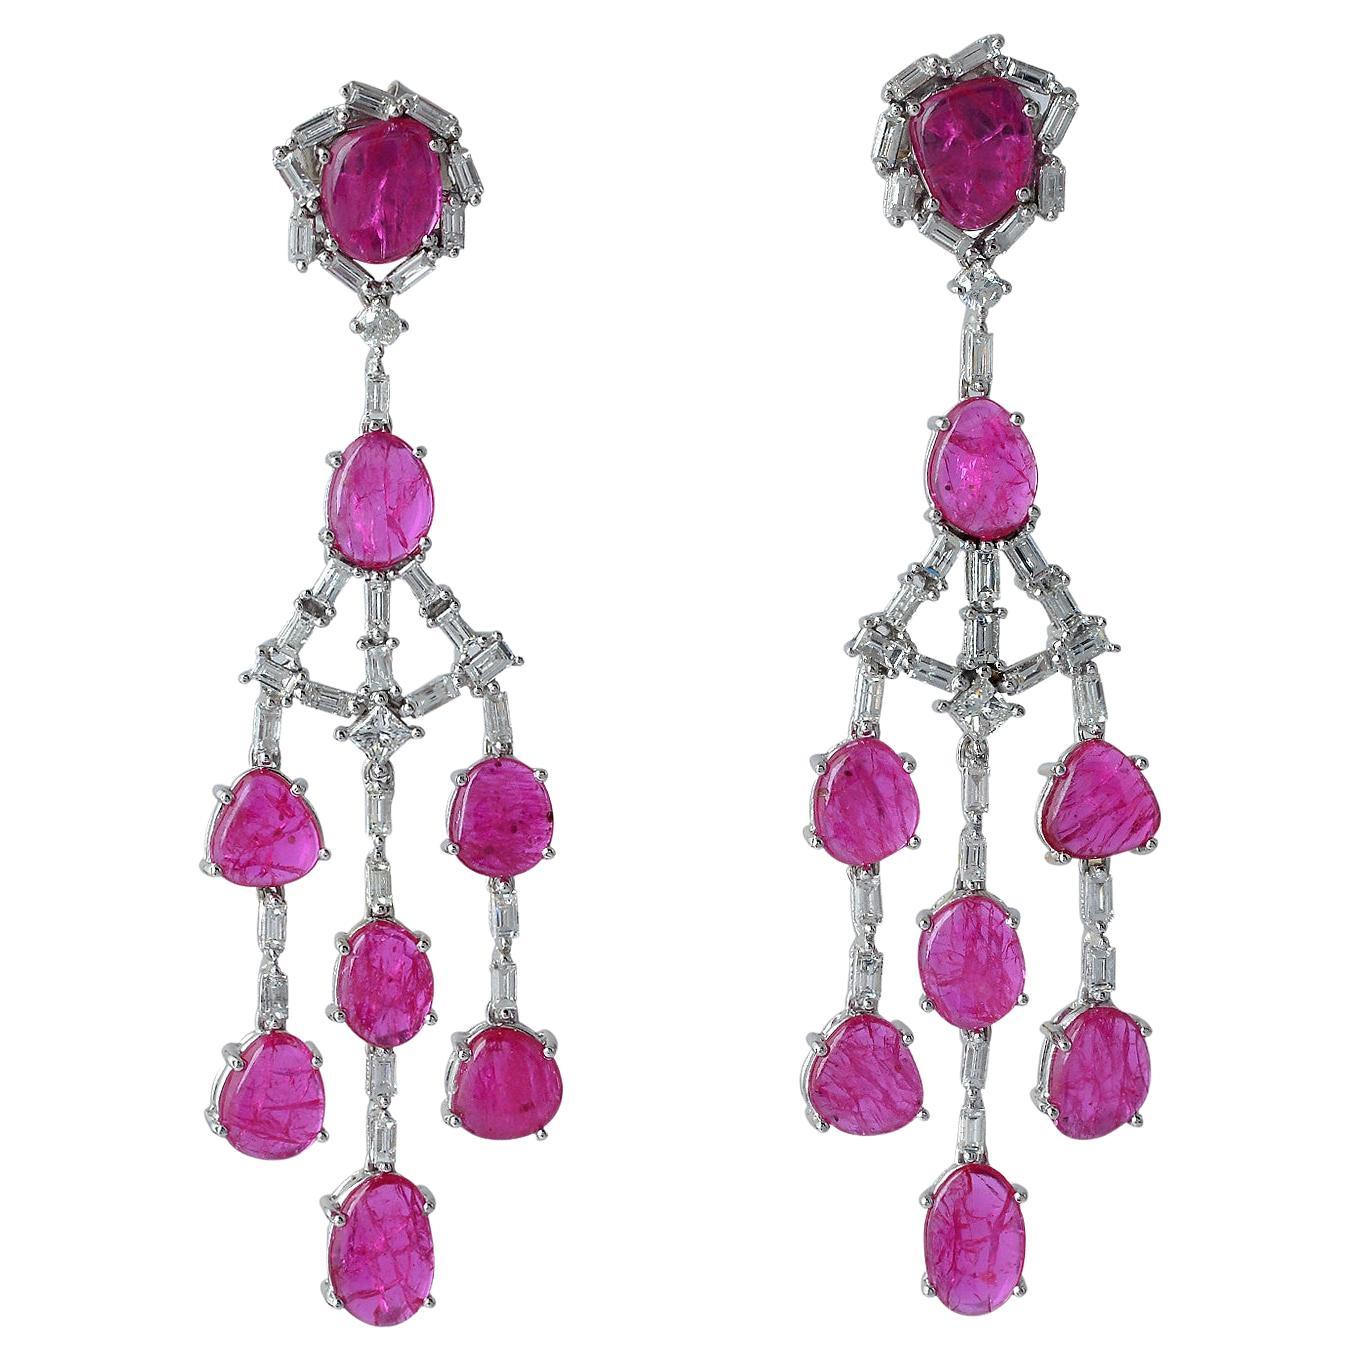 Multi Shaped Ruby Chandelier Earrings With Diamonds Made In 18k white Gold